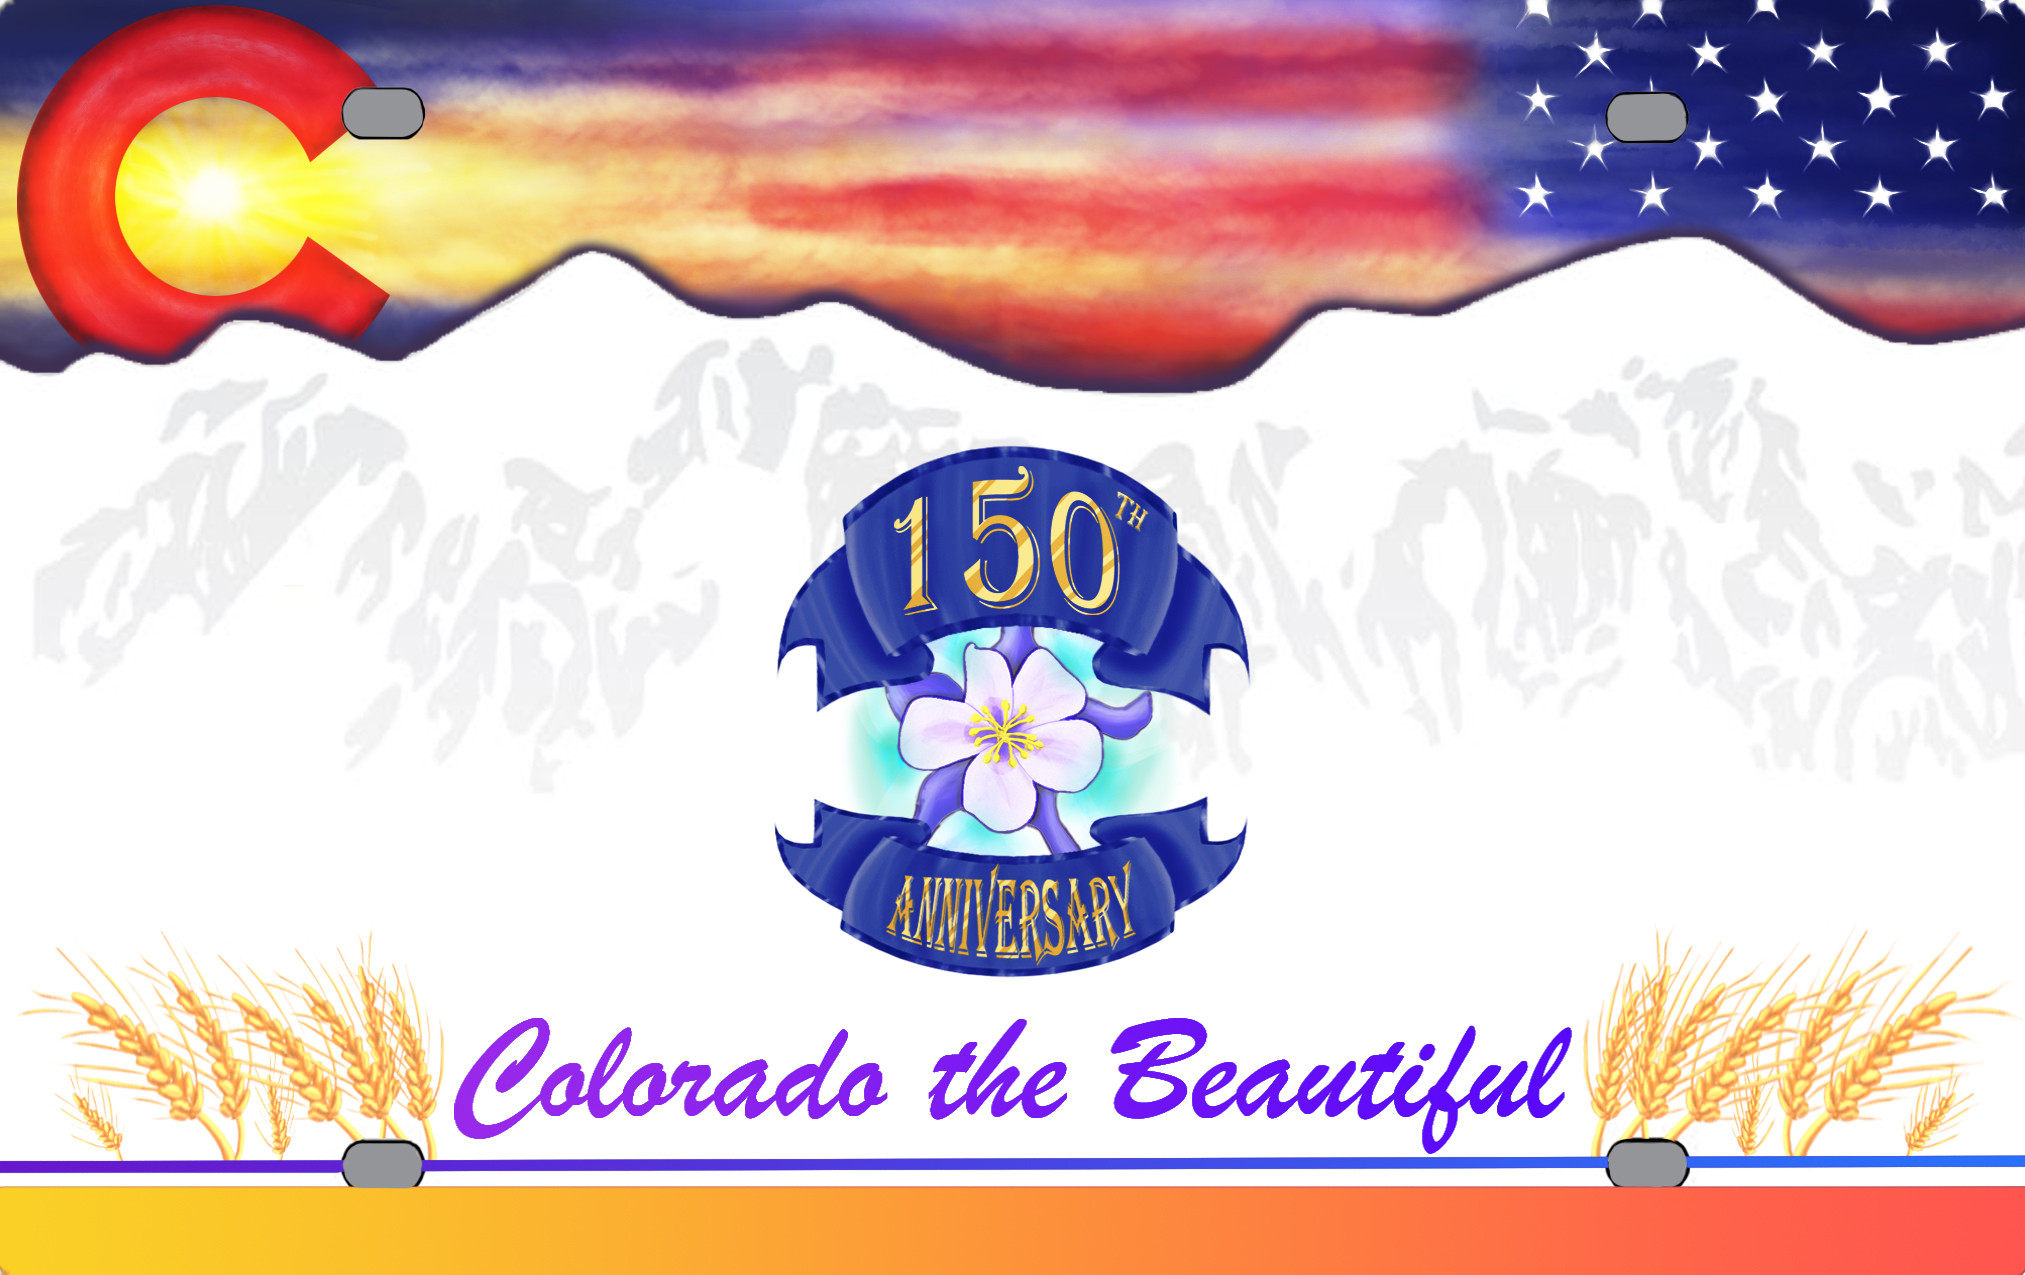 Historic Colorado license plate design contest entry - inspired by the song, "America the Beautiful."